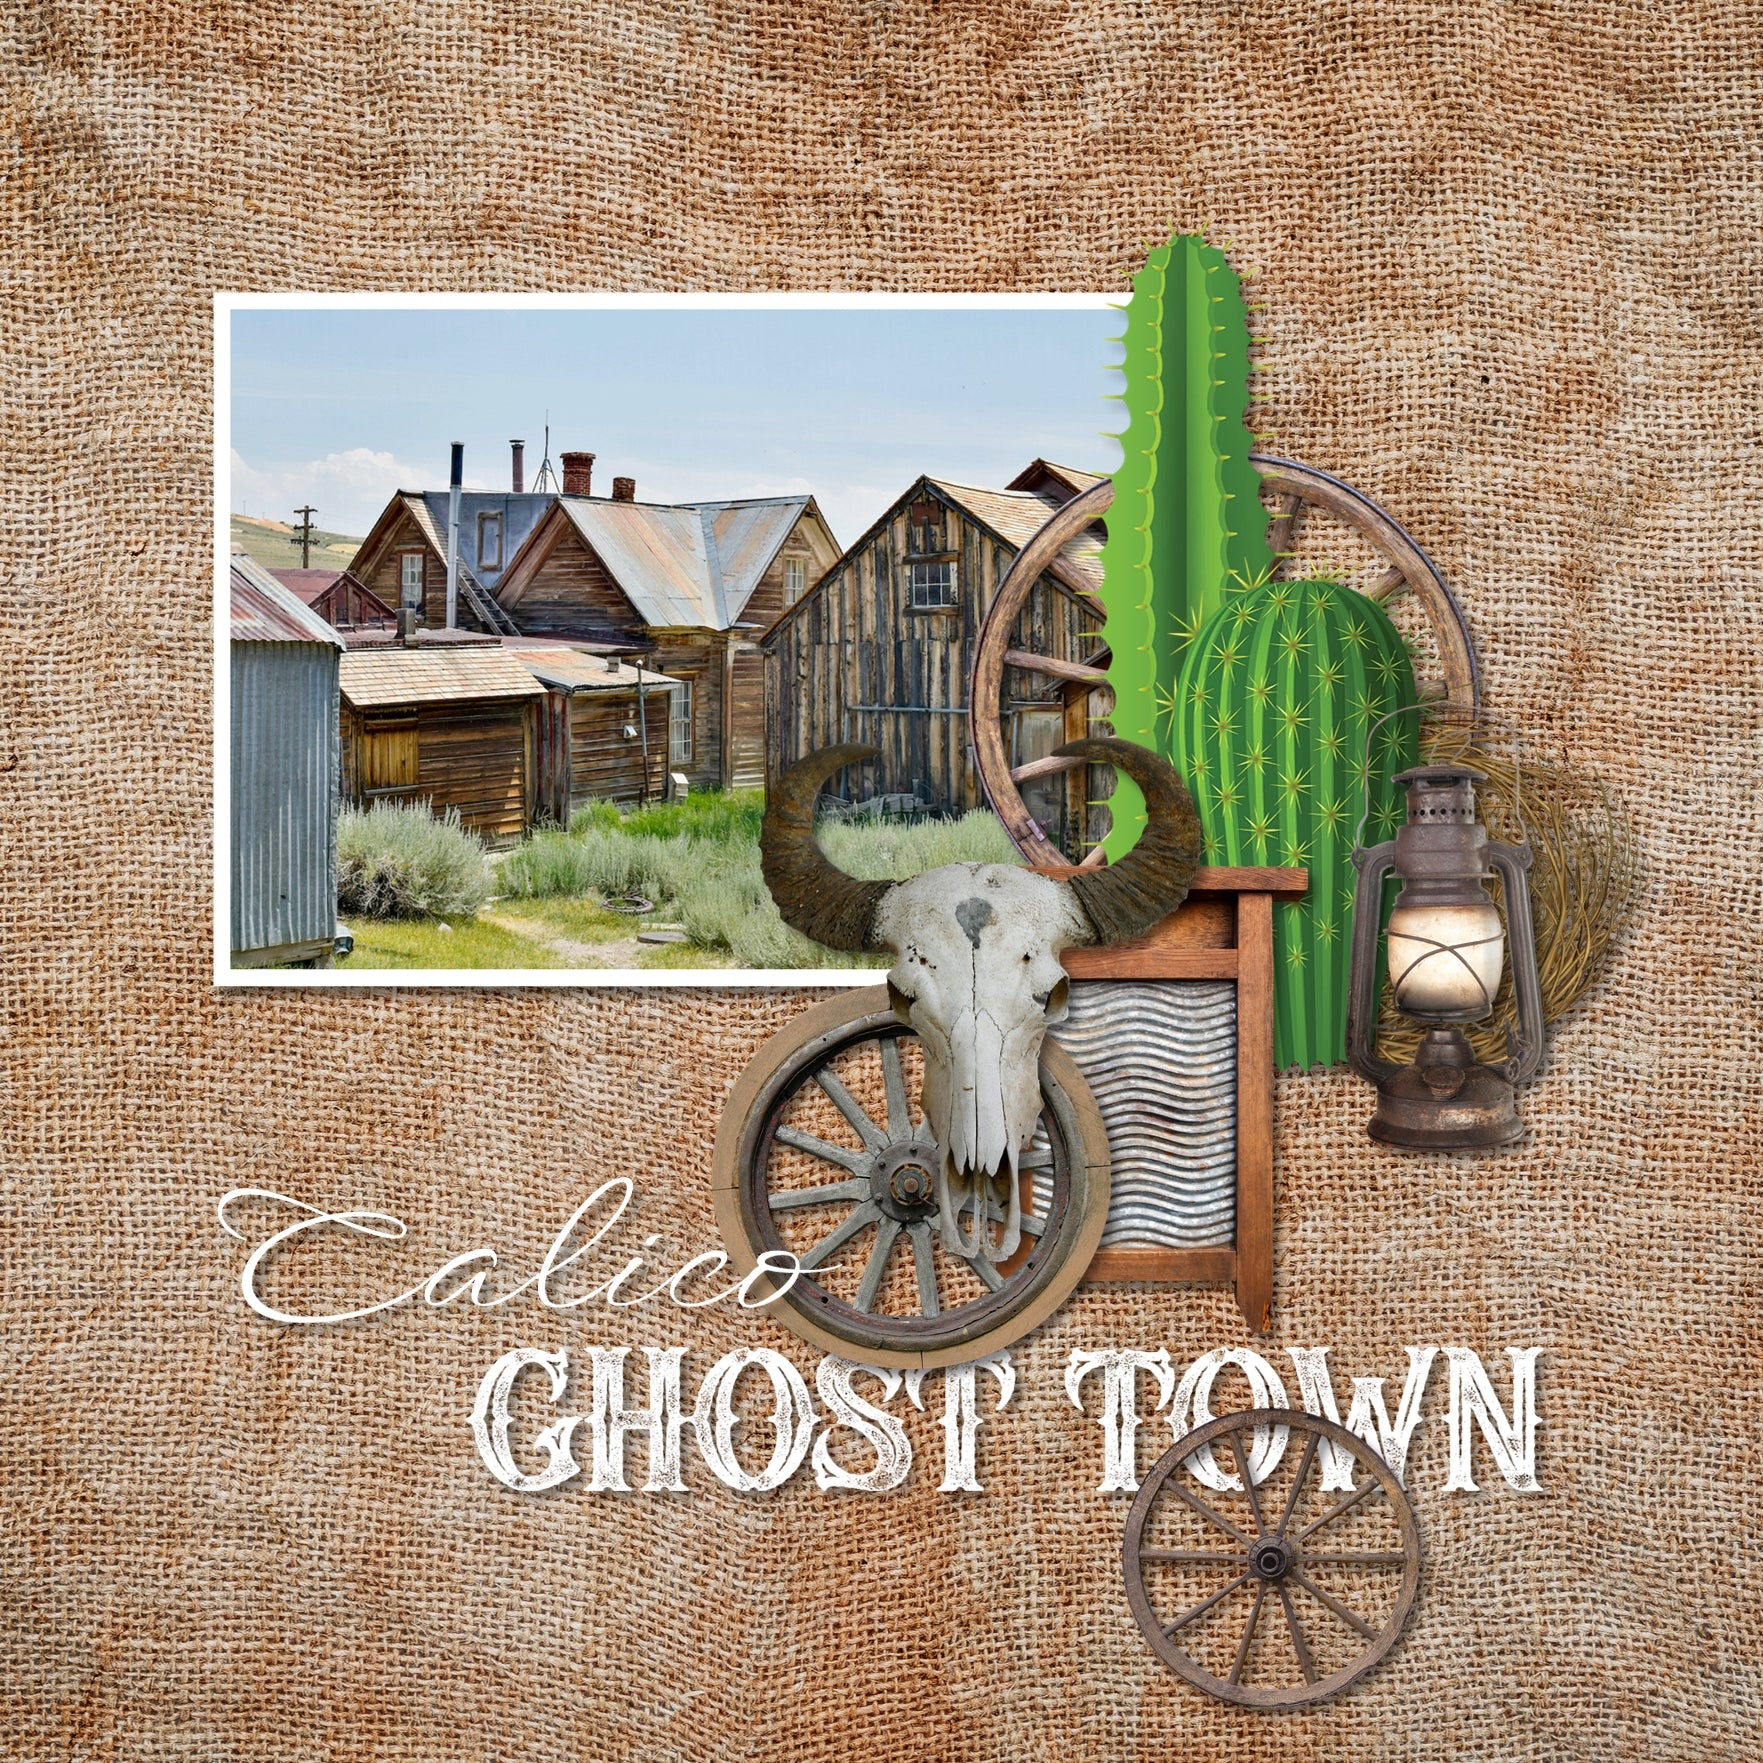 The Wild West Town Alpha Set features an authentic stamped and grunge look digital art set of alphabet letters, numbers, and some punctuation. Great for western-inspired digital scrapbook pages including travels to the Southwest (Arizona, Colorado, Utah, Nevada, New Mexico), cowboy and cowgirl dances and hoedowns, rodeo and ranch events, ghost towns, vacations to the desert, Mexico, and so much more!